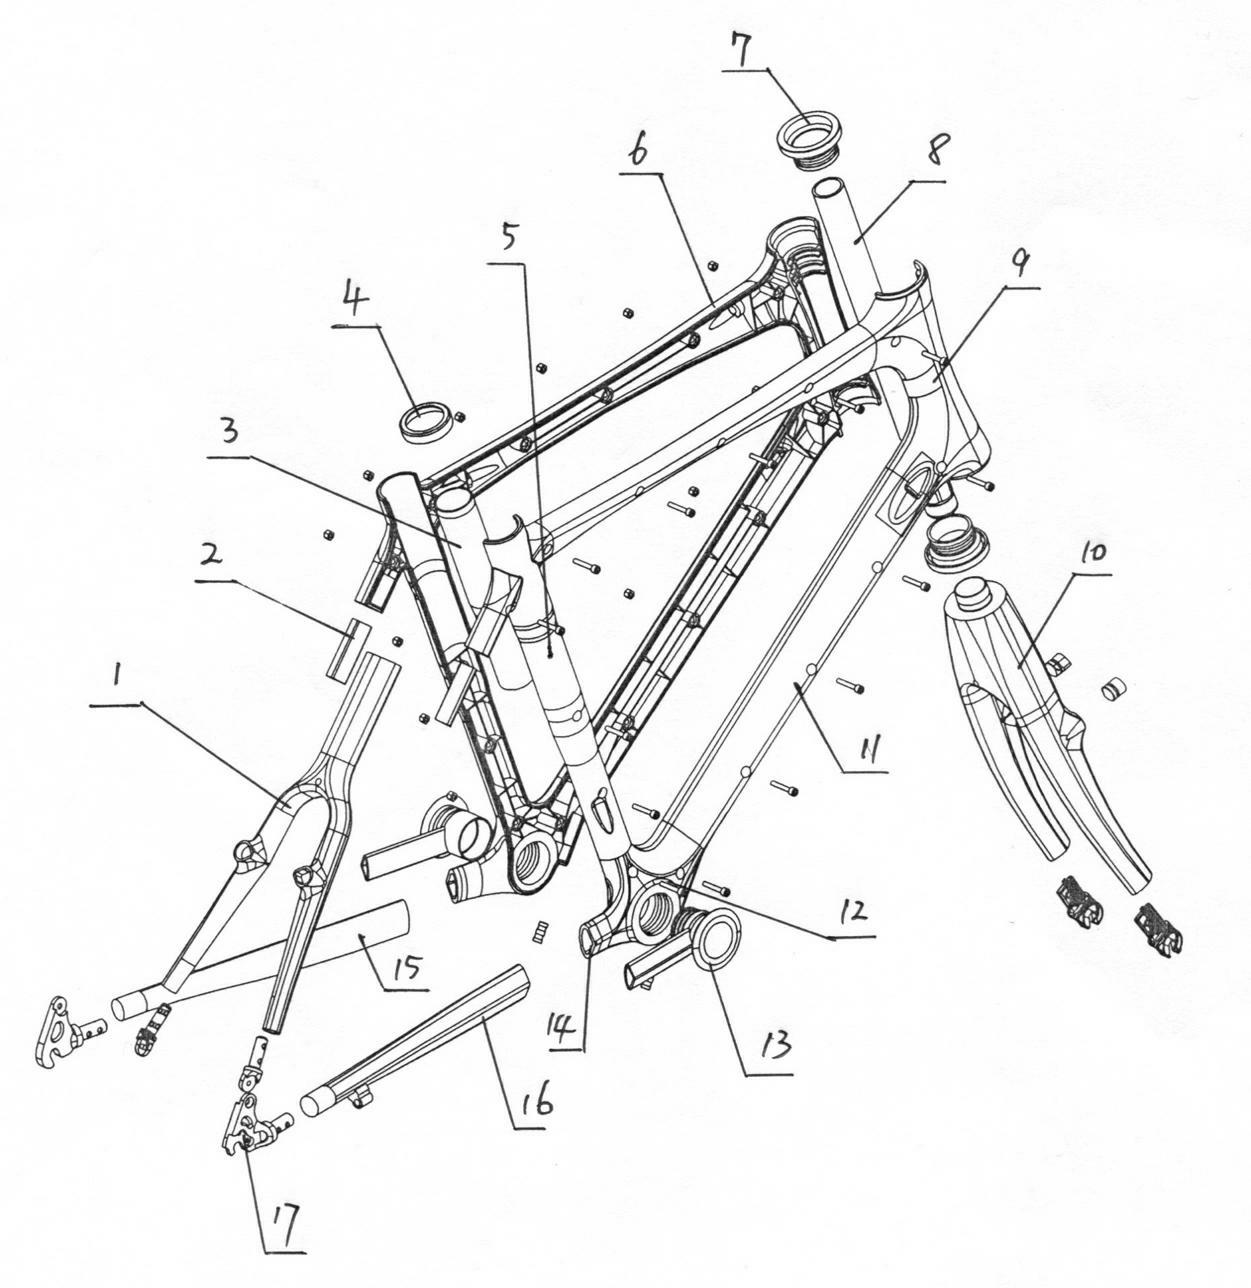 Injection-molded bicycle frame by using carbon-plastic material